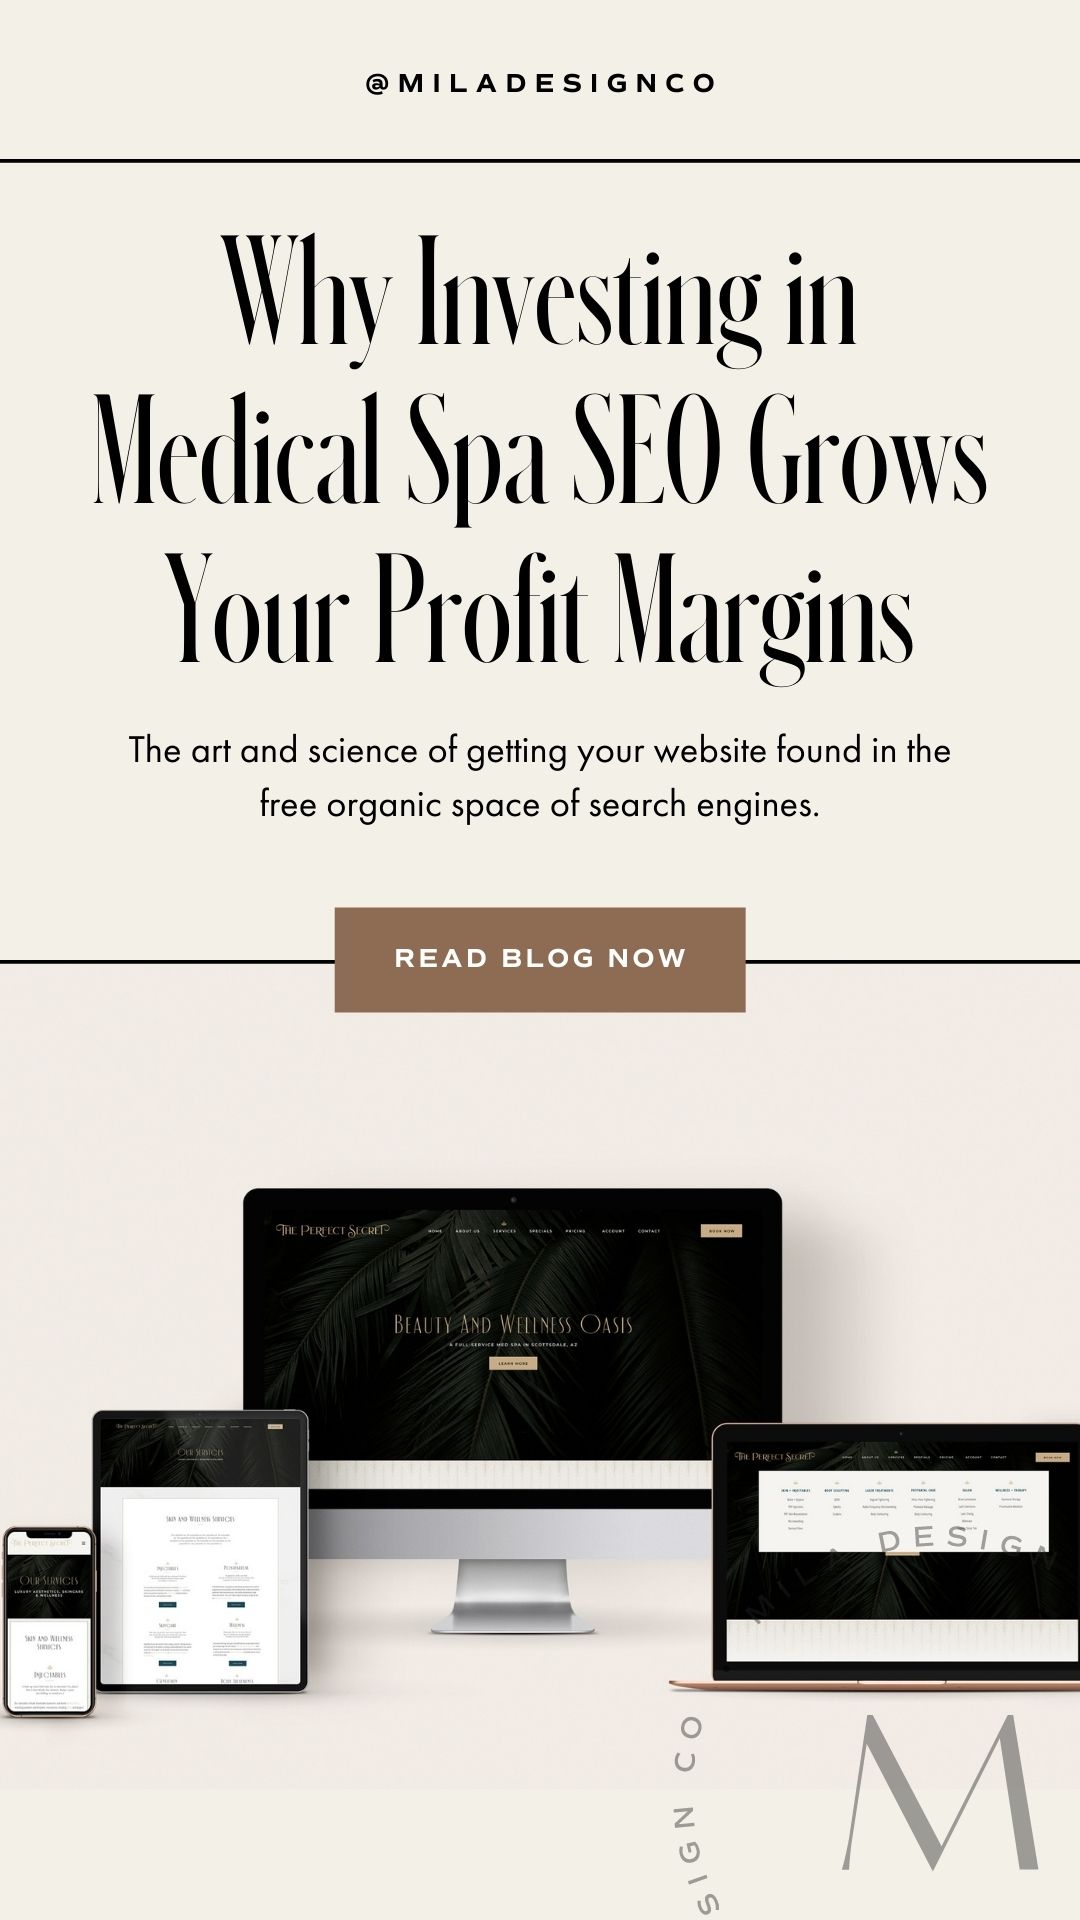 graphic with text: "Why Investing in Medical Spa SEO Grows Your Profit Margins"